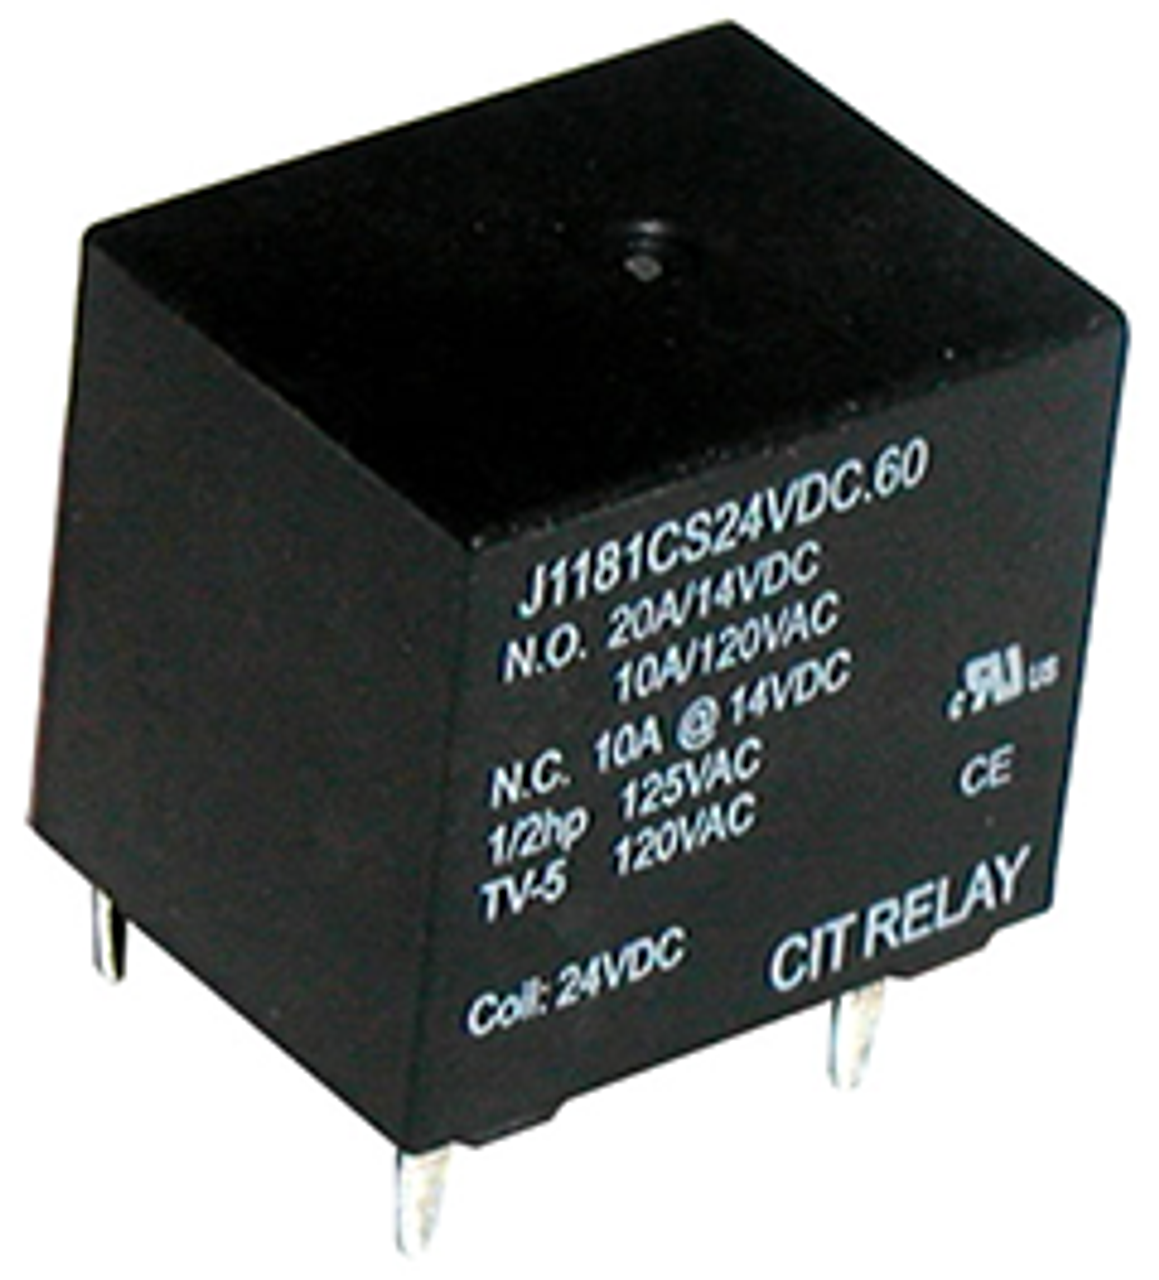 CIT Relay and Switch J1181AS12VDC.60 Power Relays